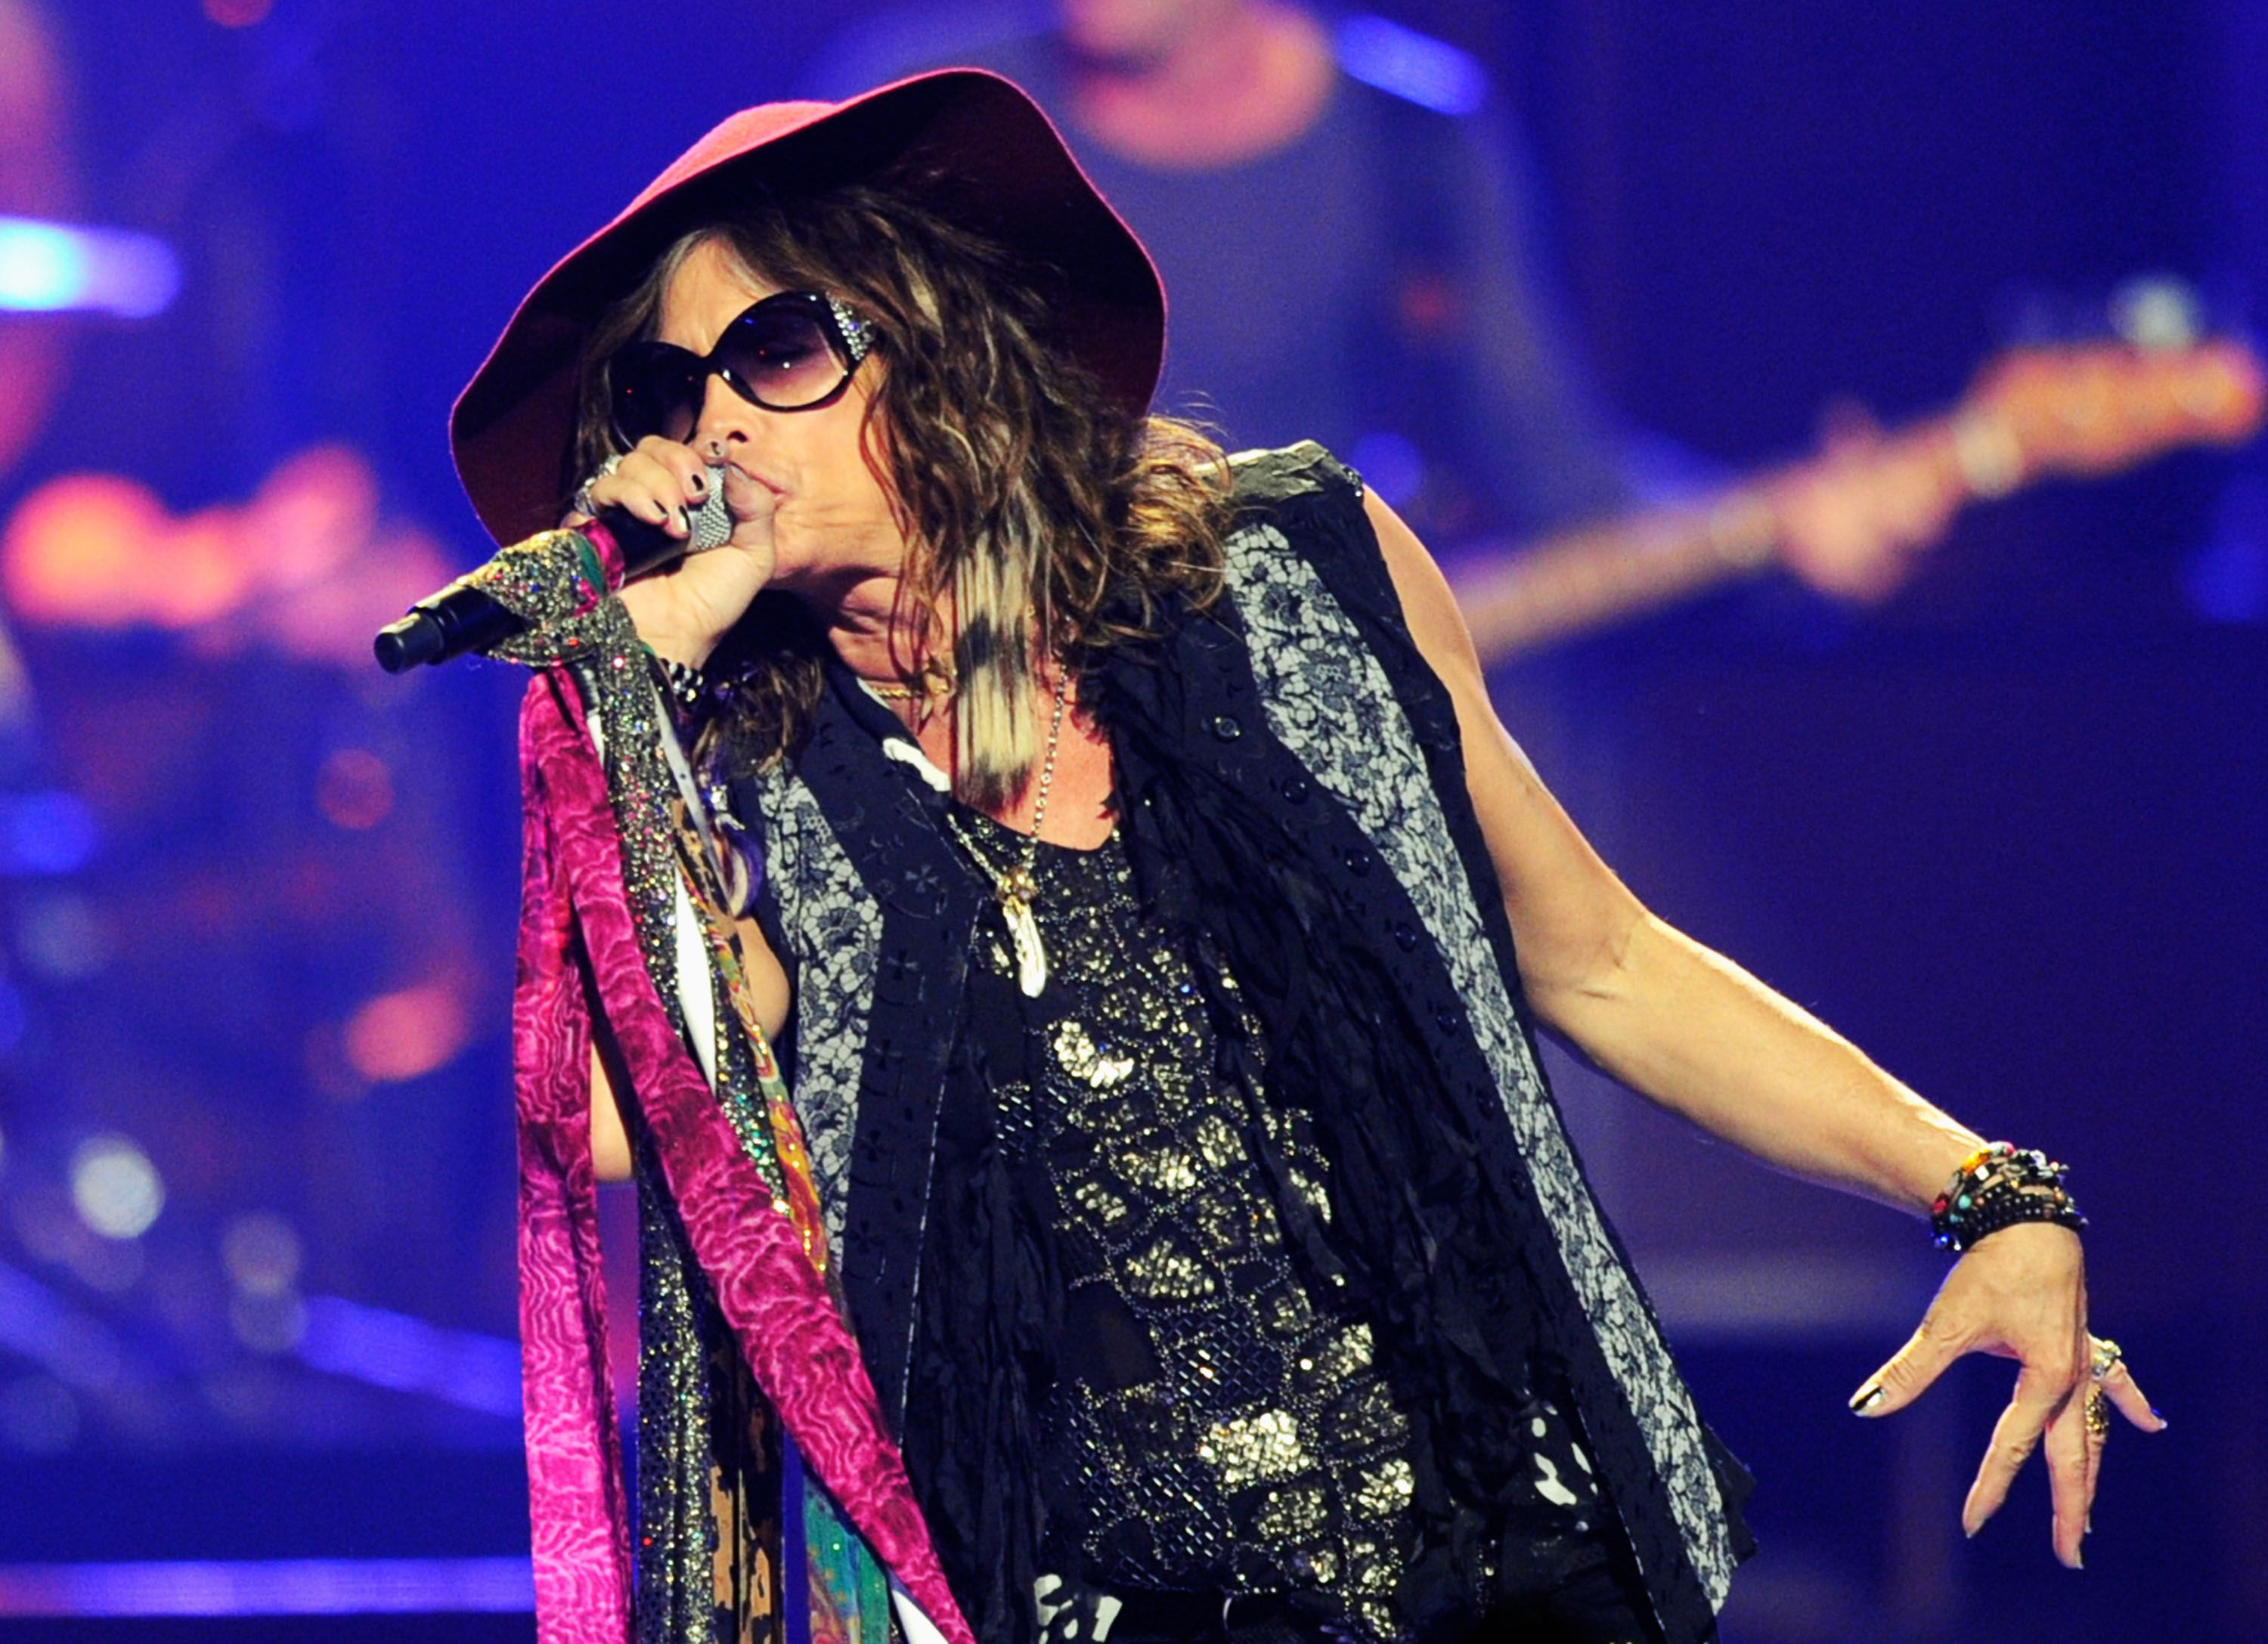 LAS VEGAS, NV - SEPTEMBER 24: Singer Steven Tyler performs onstage at the iHeartRadio Music Festival held at the MGM Grand Garden Arena on September 24, 2011 in Las Vegas, Nevada. (Photo by Ethan Miller/Getty Images for Clear Channel)